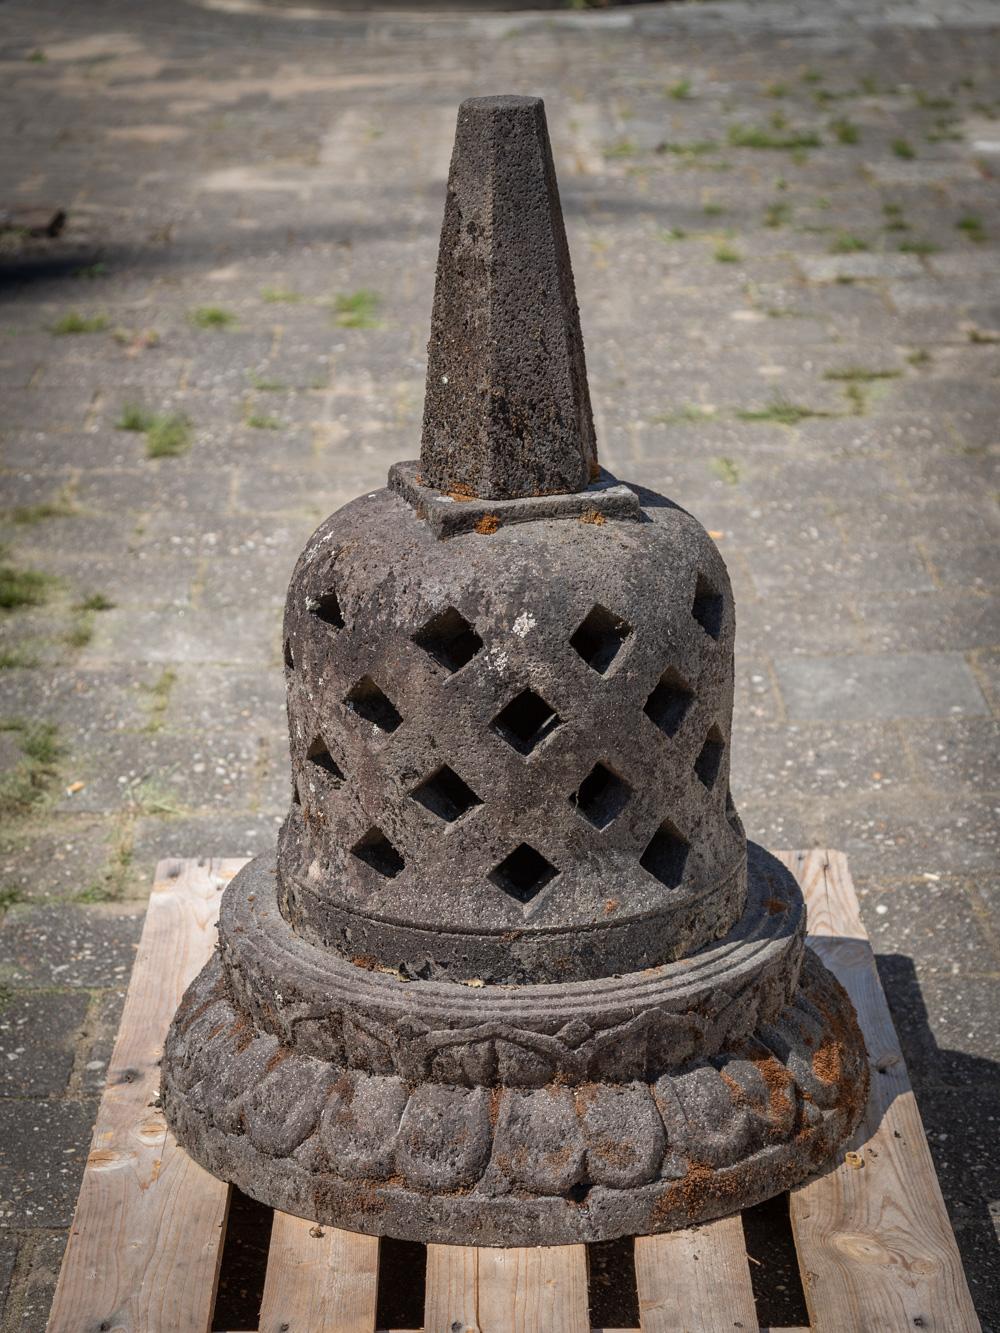 The old lavastone Stupa is a magnificent and sacred artifact originating from Indonesia. Crafted from lavastone, this Stupa stands tall at 99 cm in height and has a diameter of 70 cm. Estimated to weigh approximately 150 kg, it carries a substantial